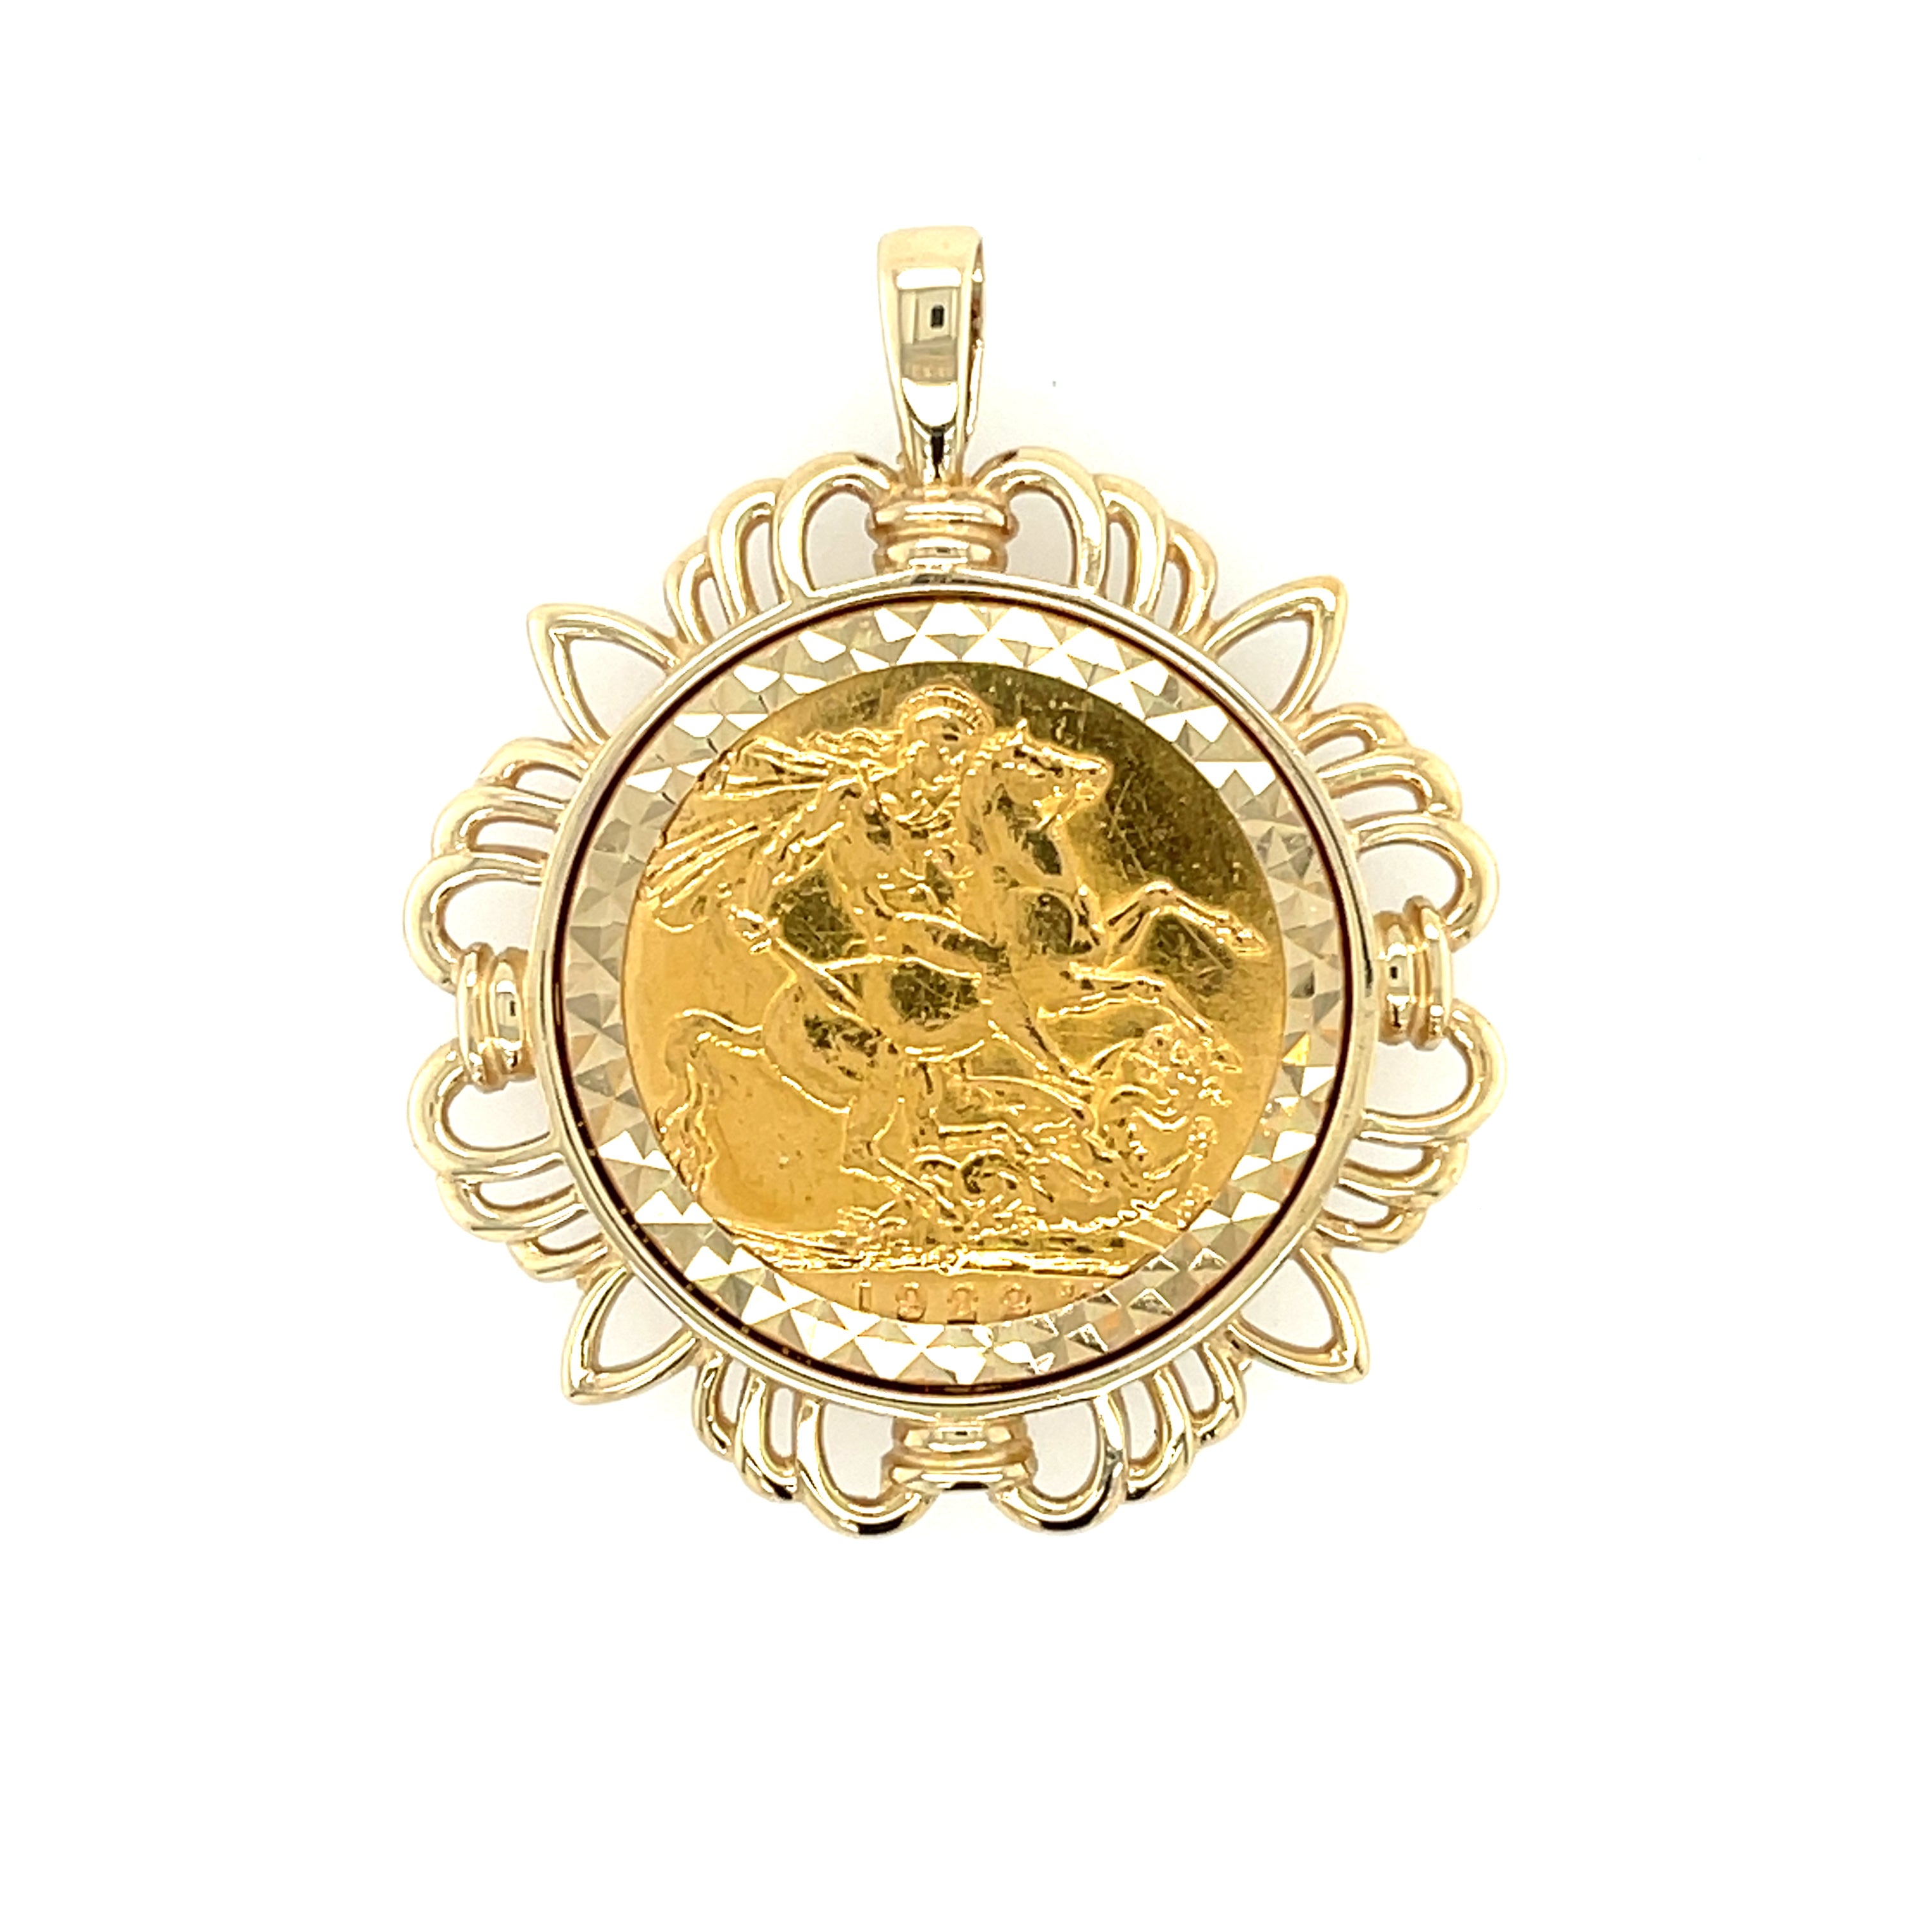 1922 George V Full Sovereign Coin & 9ct Gold Wreath Pendant Mount